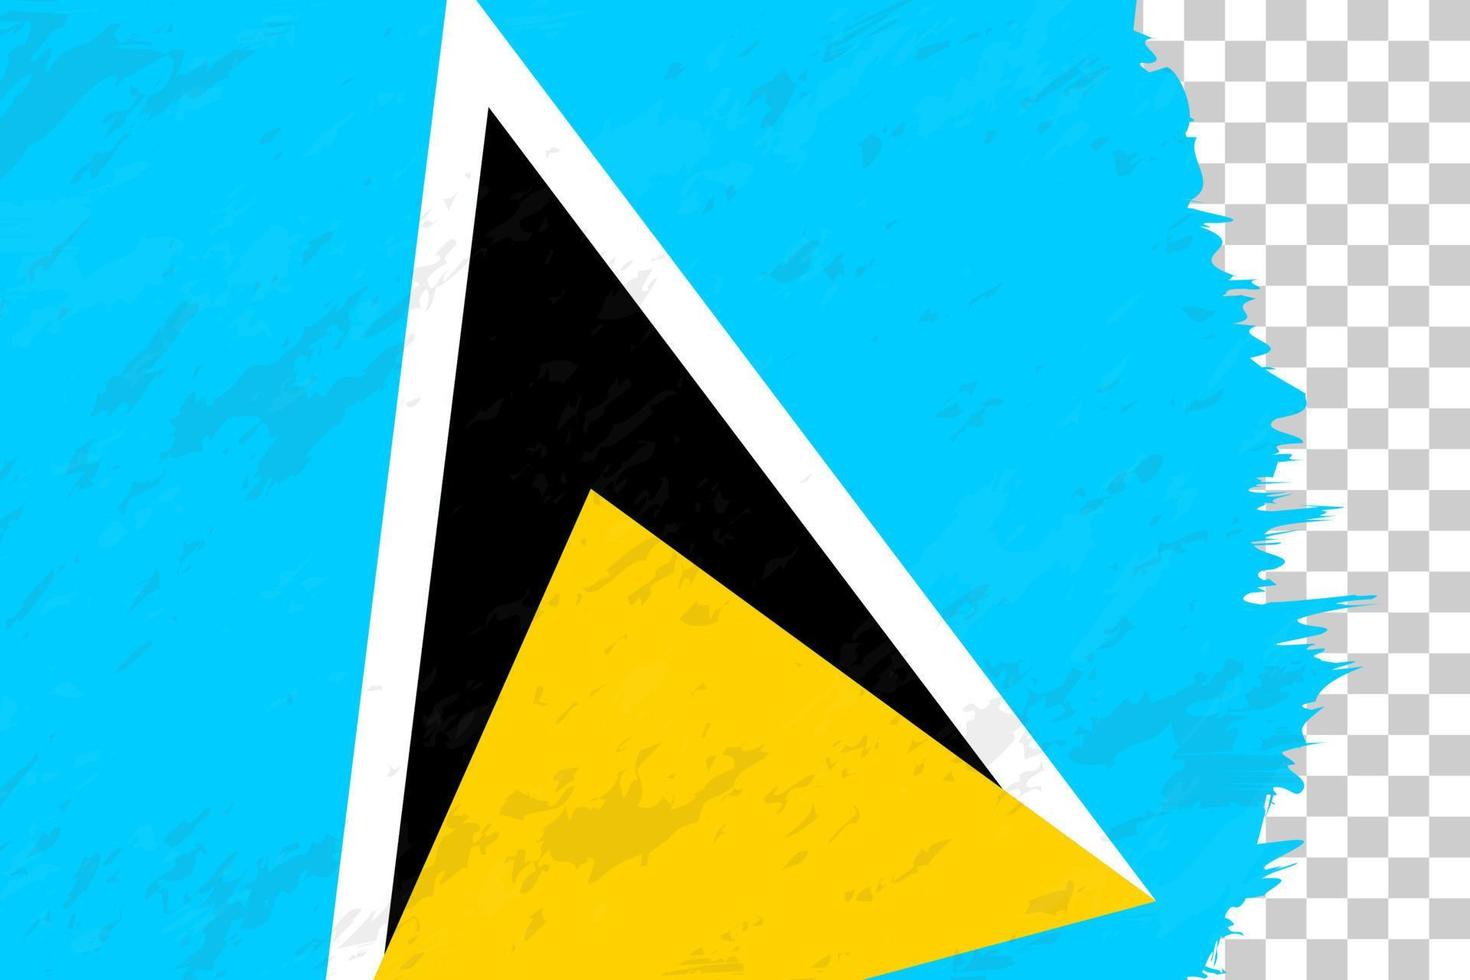 Horizontal Abstract Grunge Brushed Flag of Saint Lucia on Transparent Grid. vector